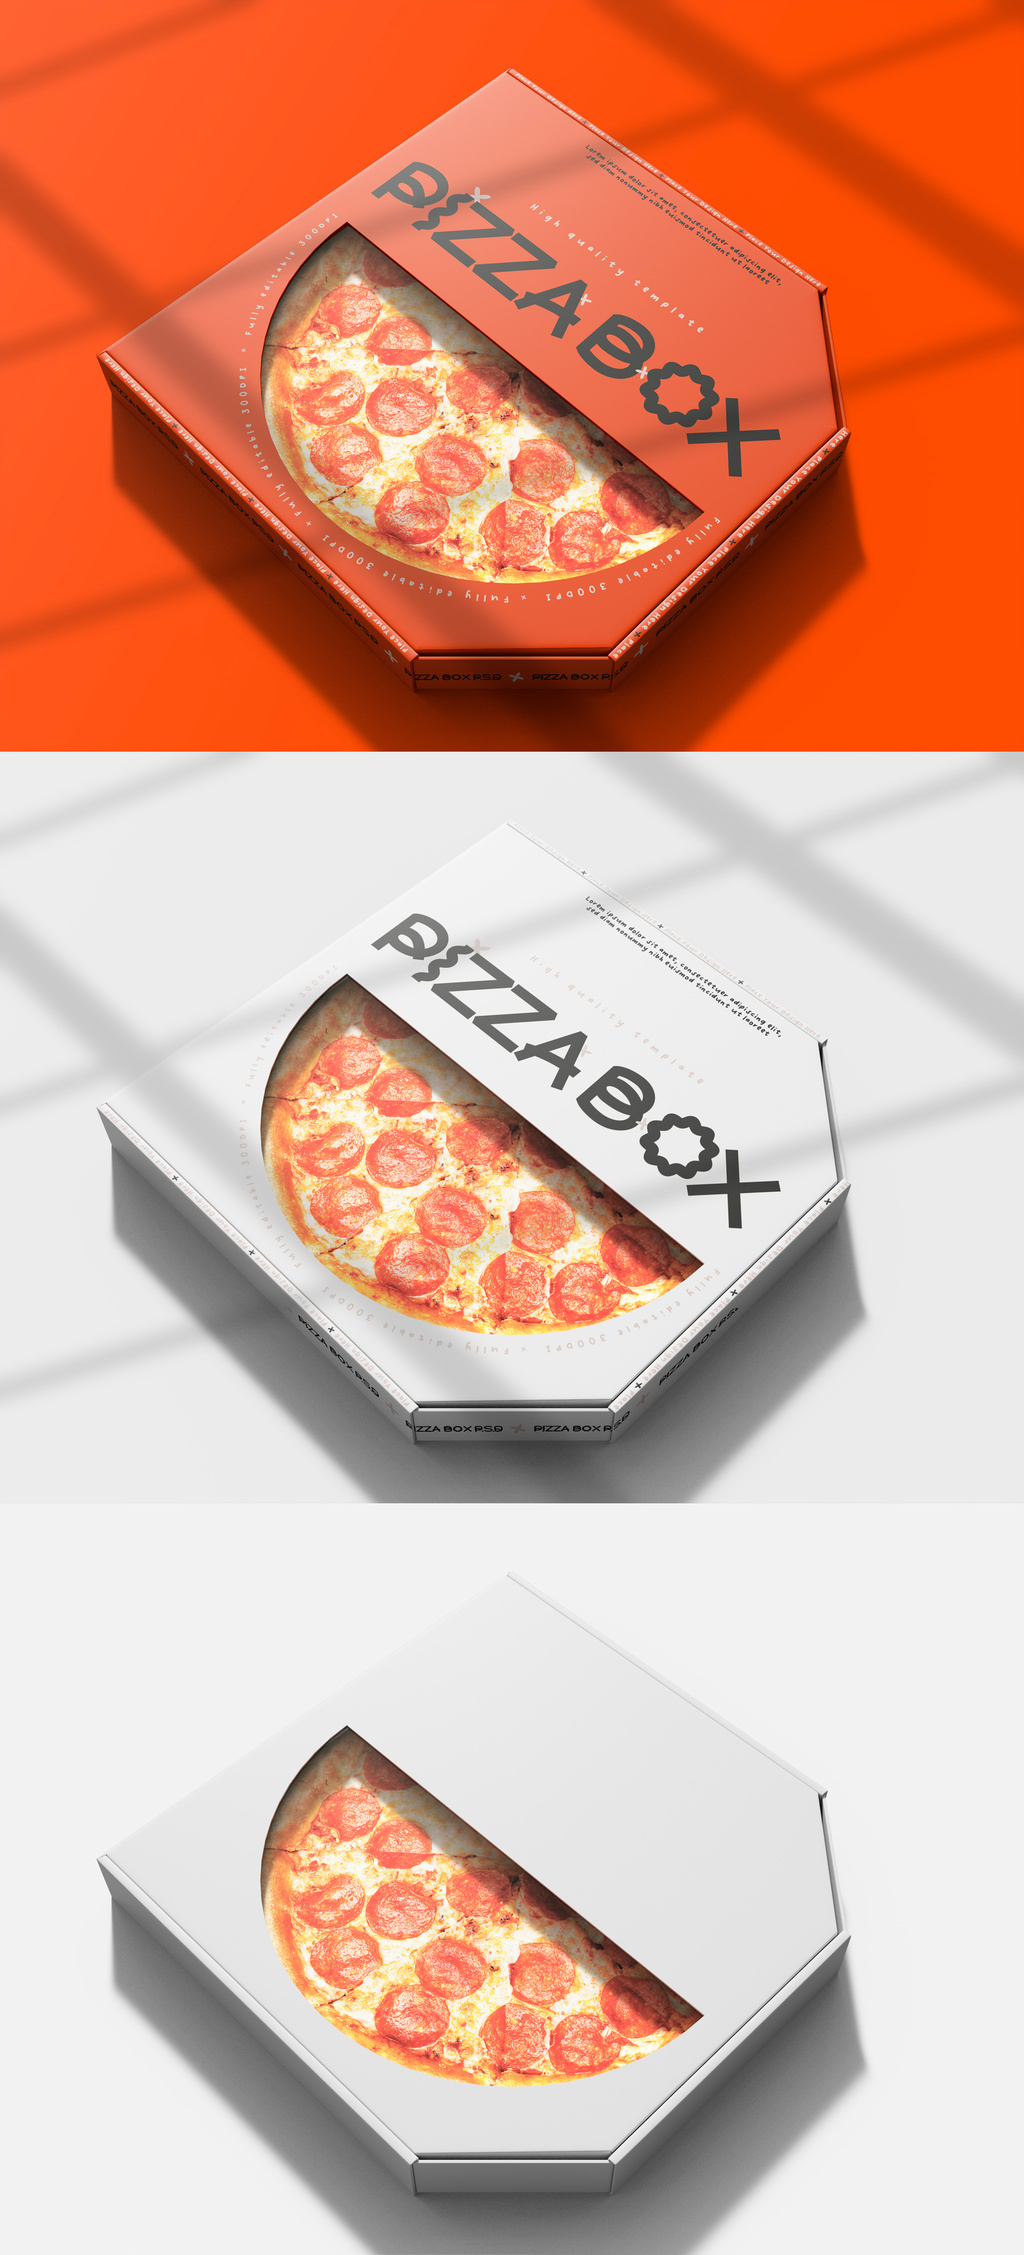 3D Pizza Box Mockup with Window
Cardboard & Packaging Mockups Photoshop